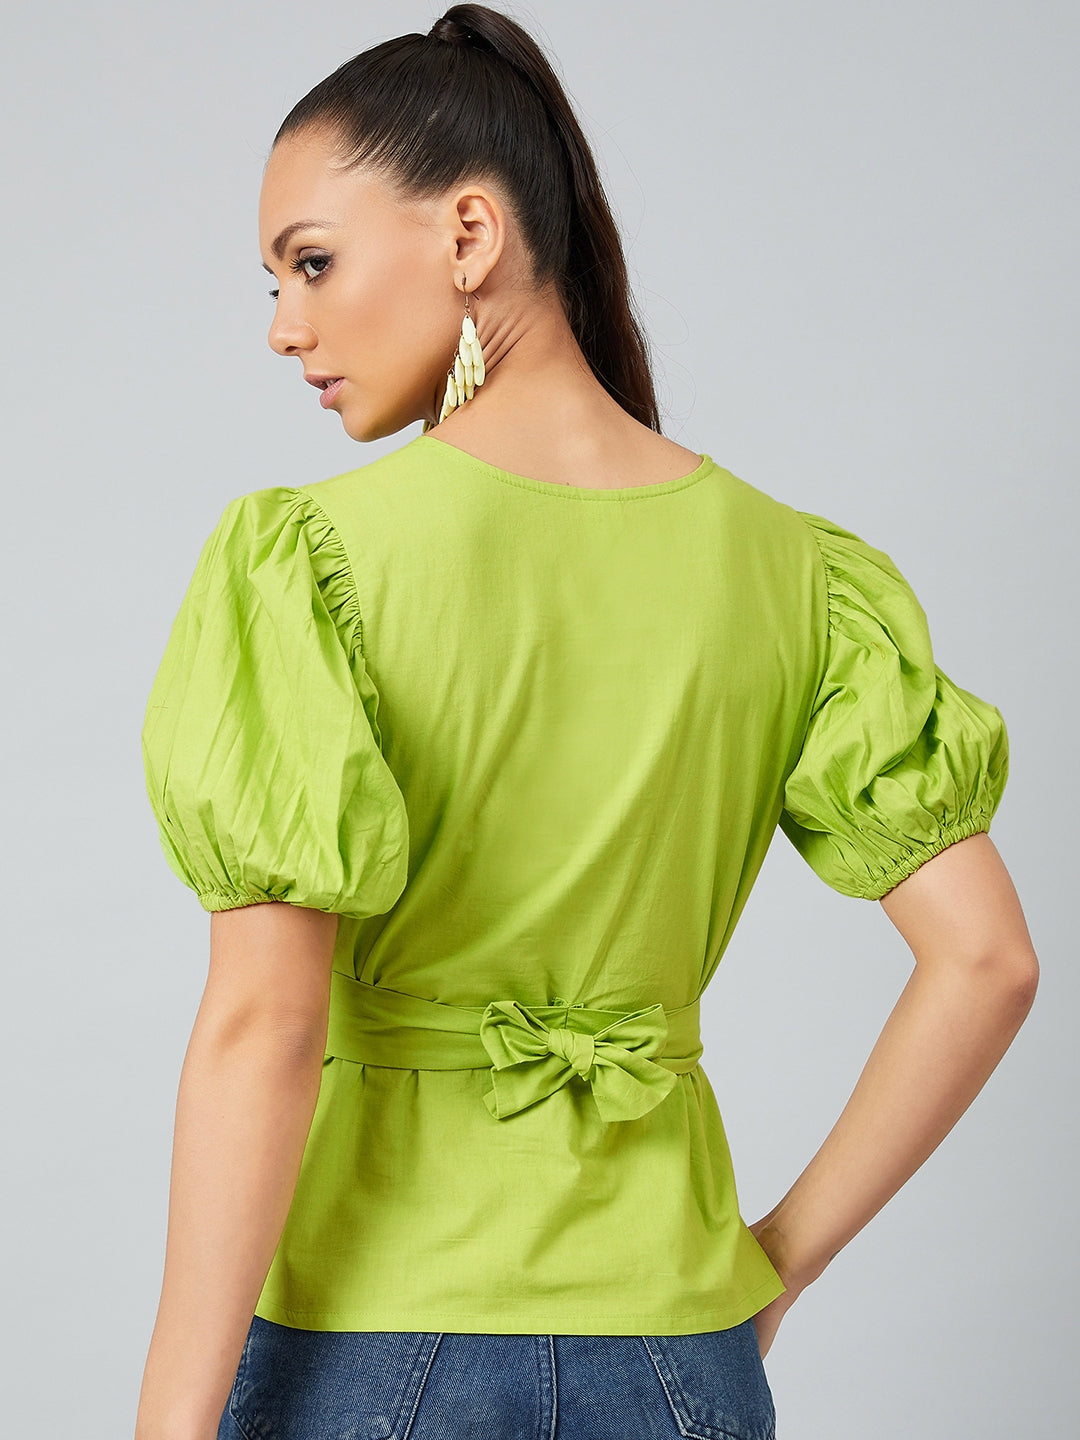 Athena Lime Green Knotted Wrap Top With Puffed Sleeves - Athena Lifestyle